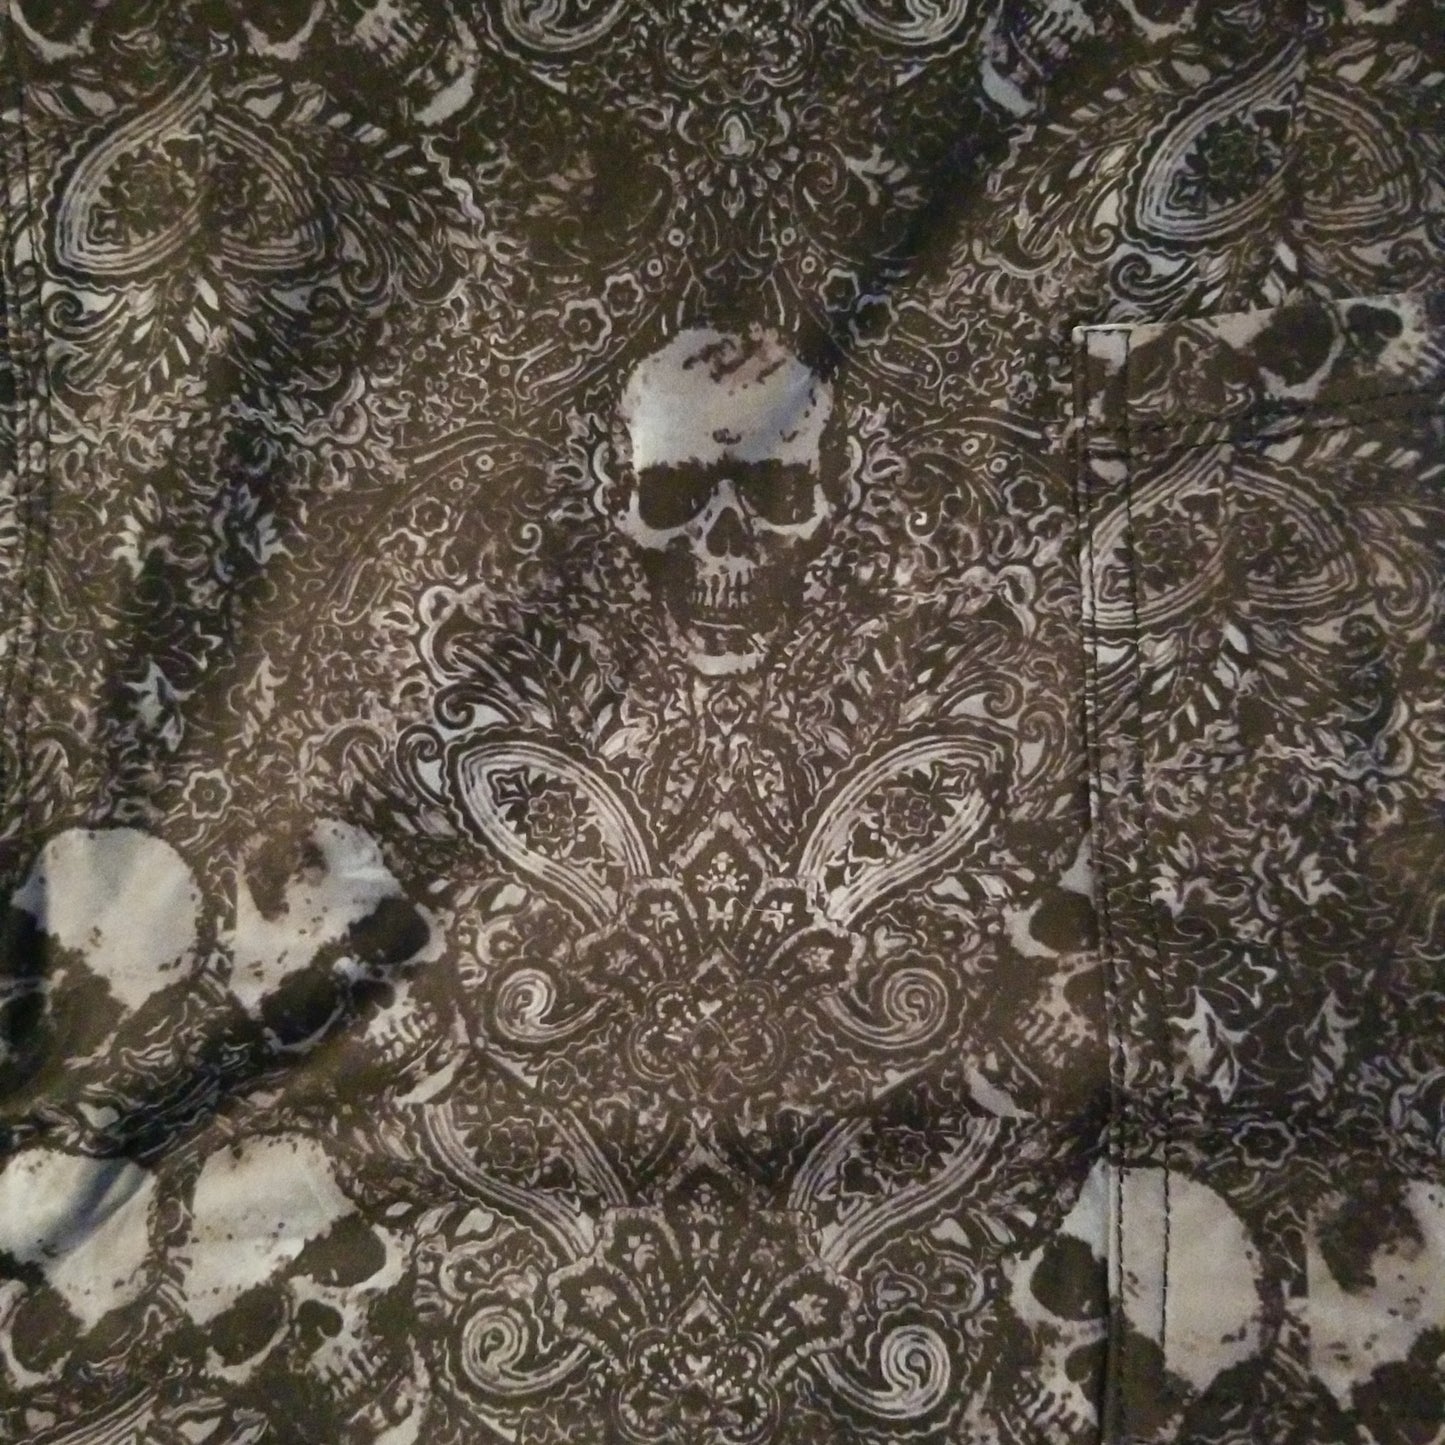 Paisley Skull With Pockets - PS ONLY